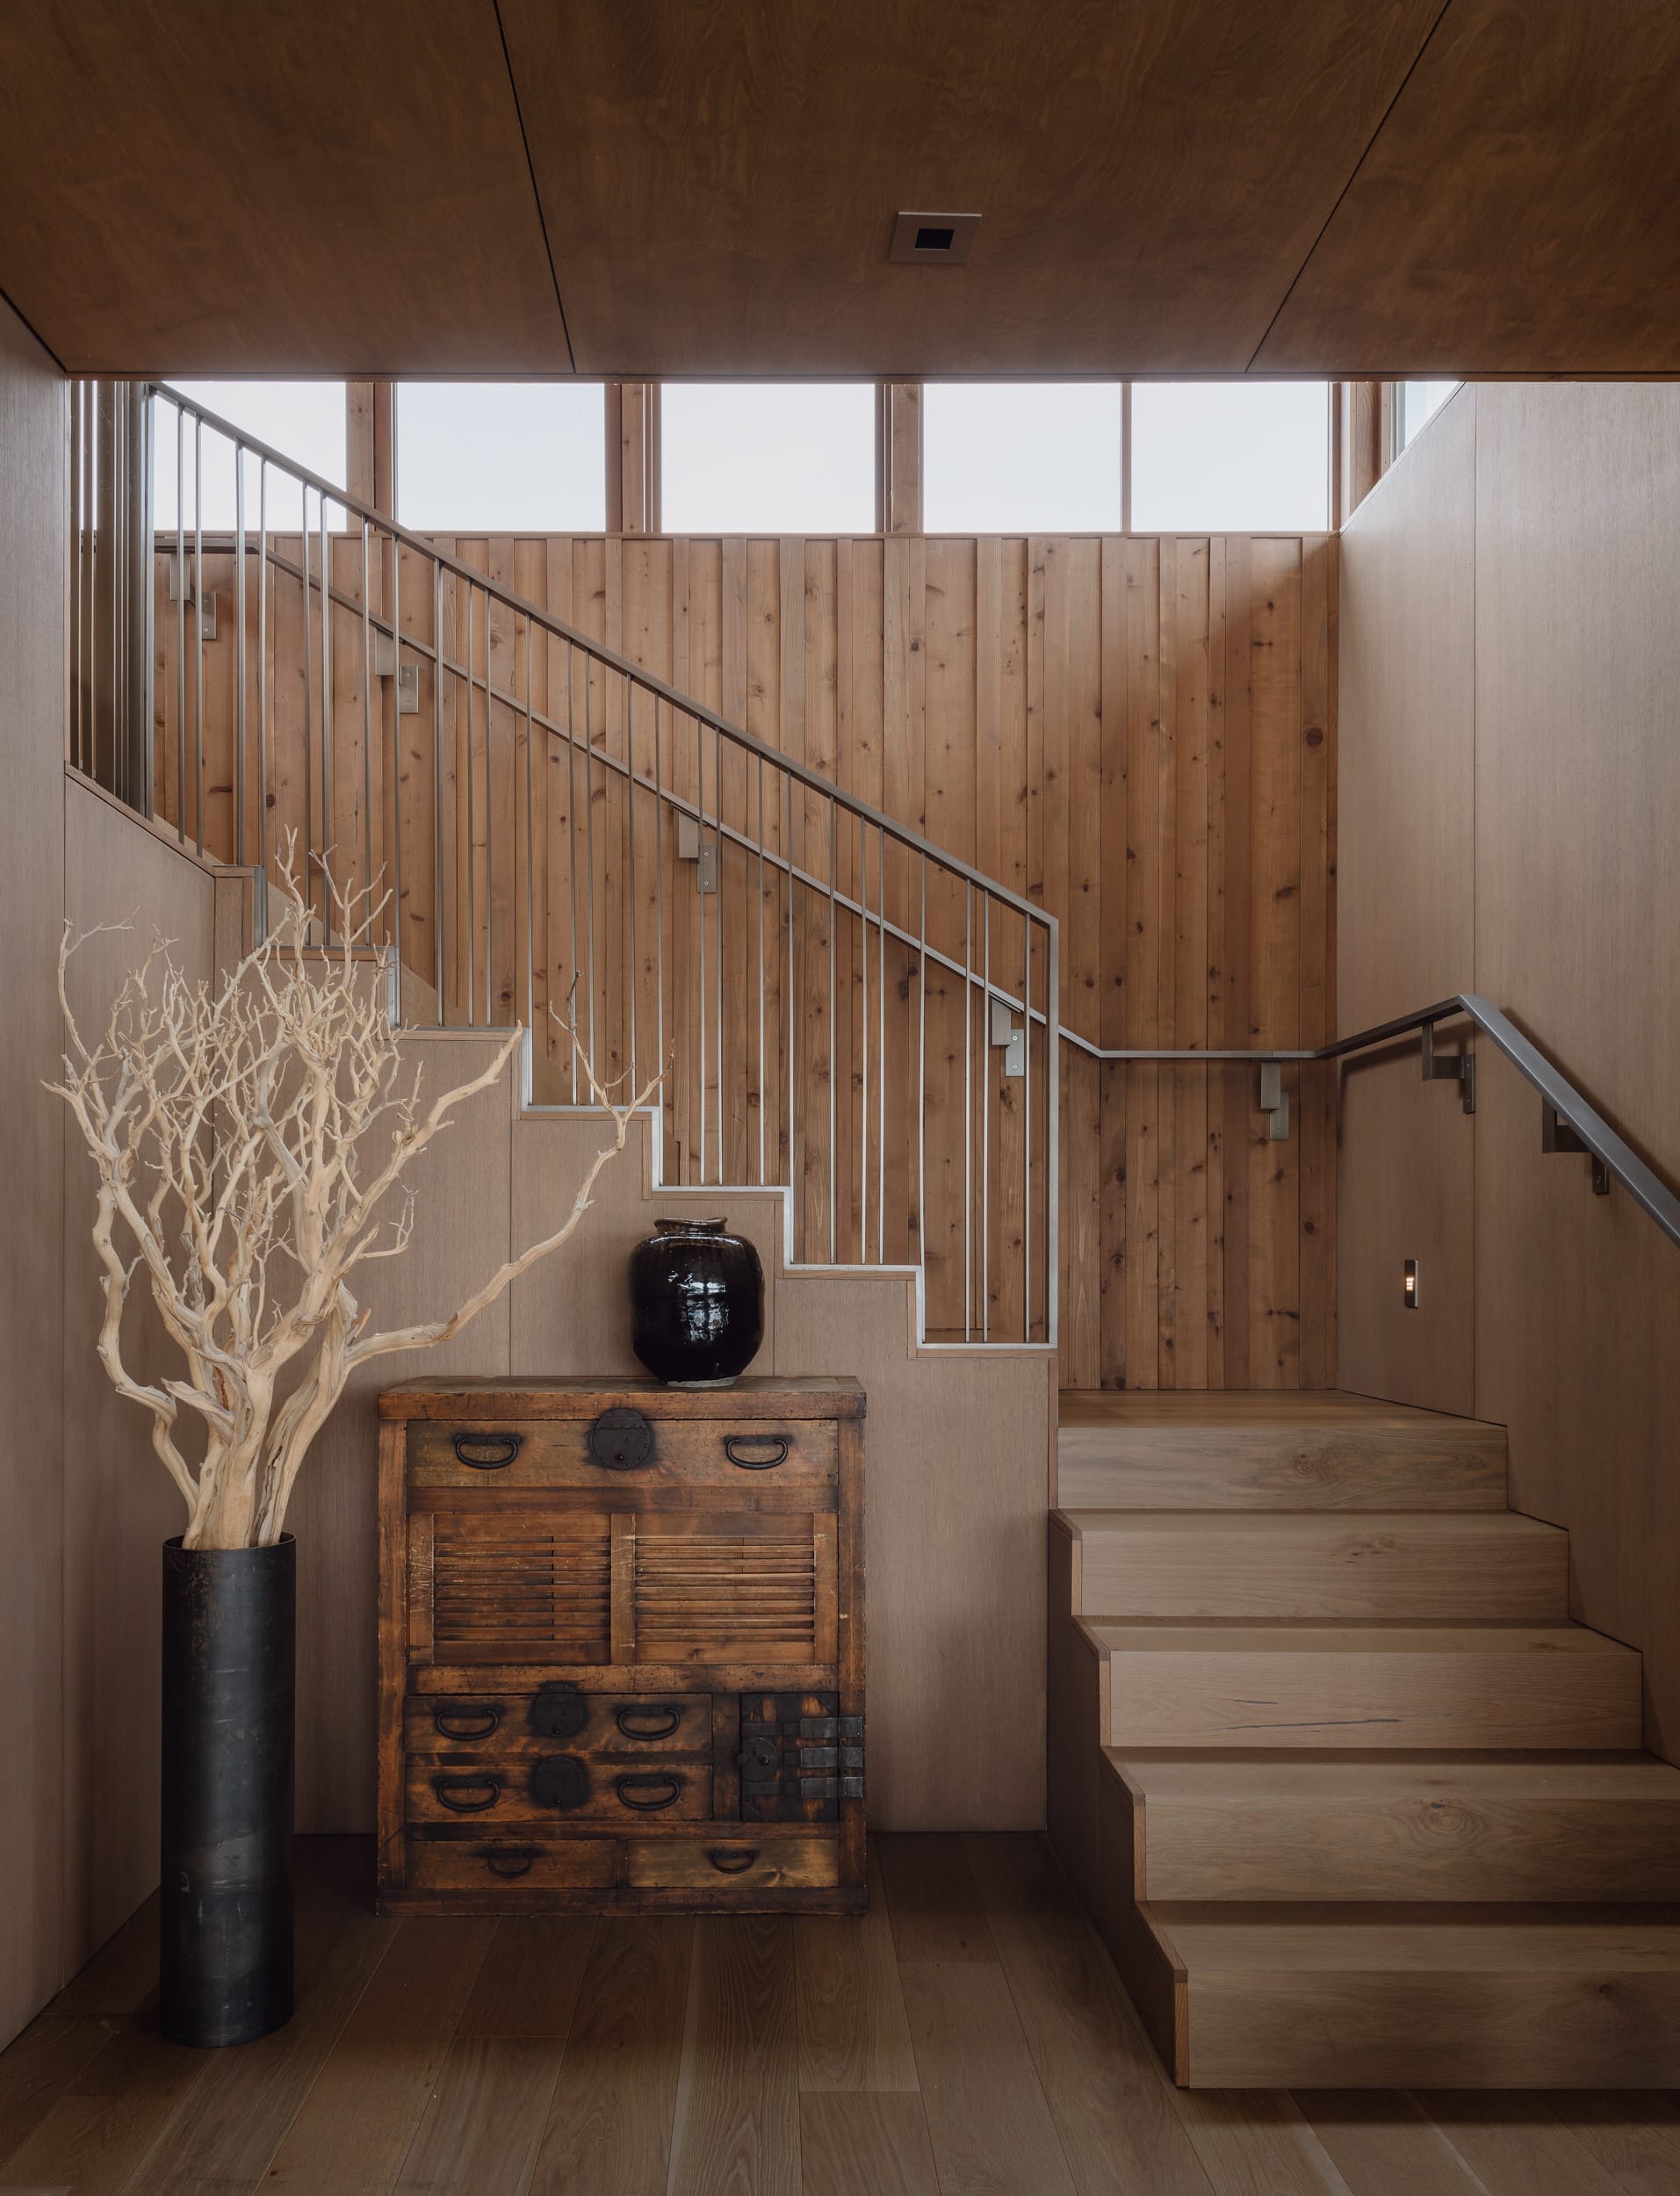 A modern home entryway featuring wooden stairs and a wooden planter, expertly crafted by a carpenter.